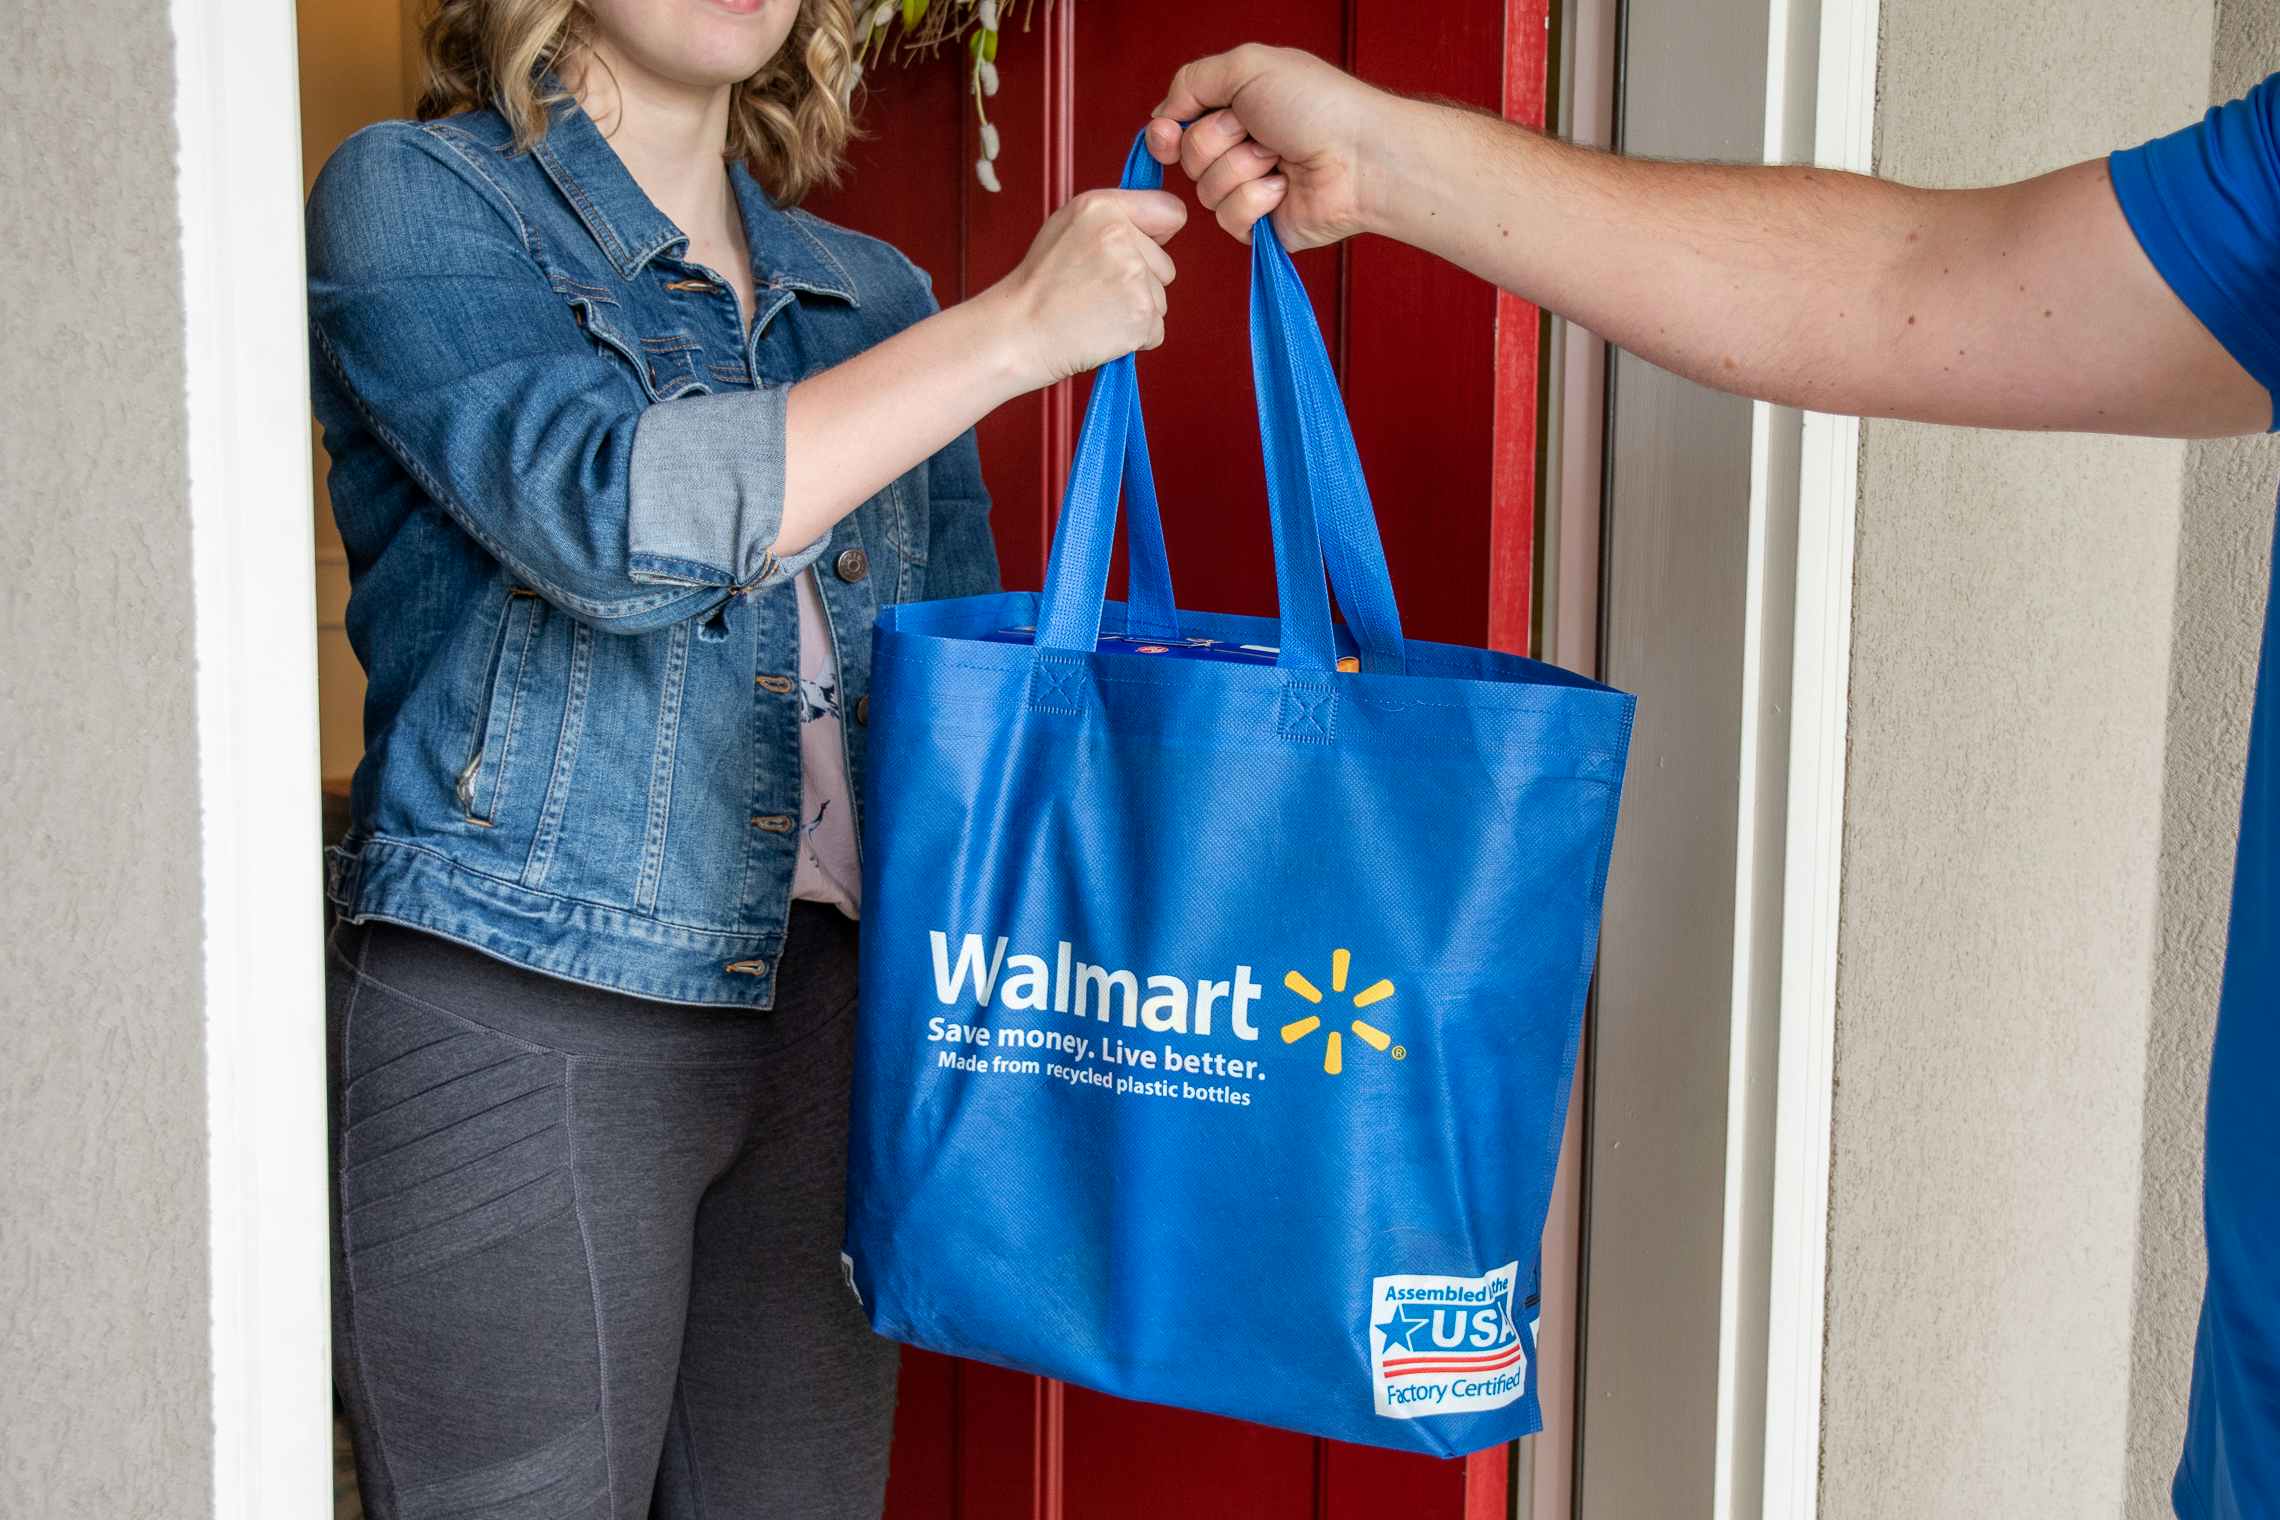 A delivery person handing a Walmart bag to a woman in her front doorway.